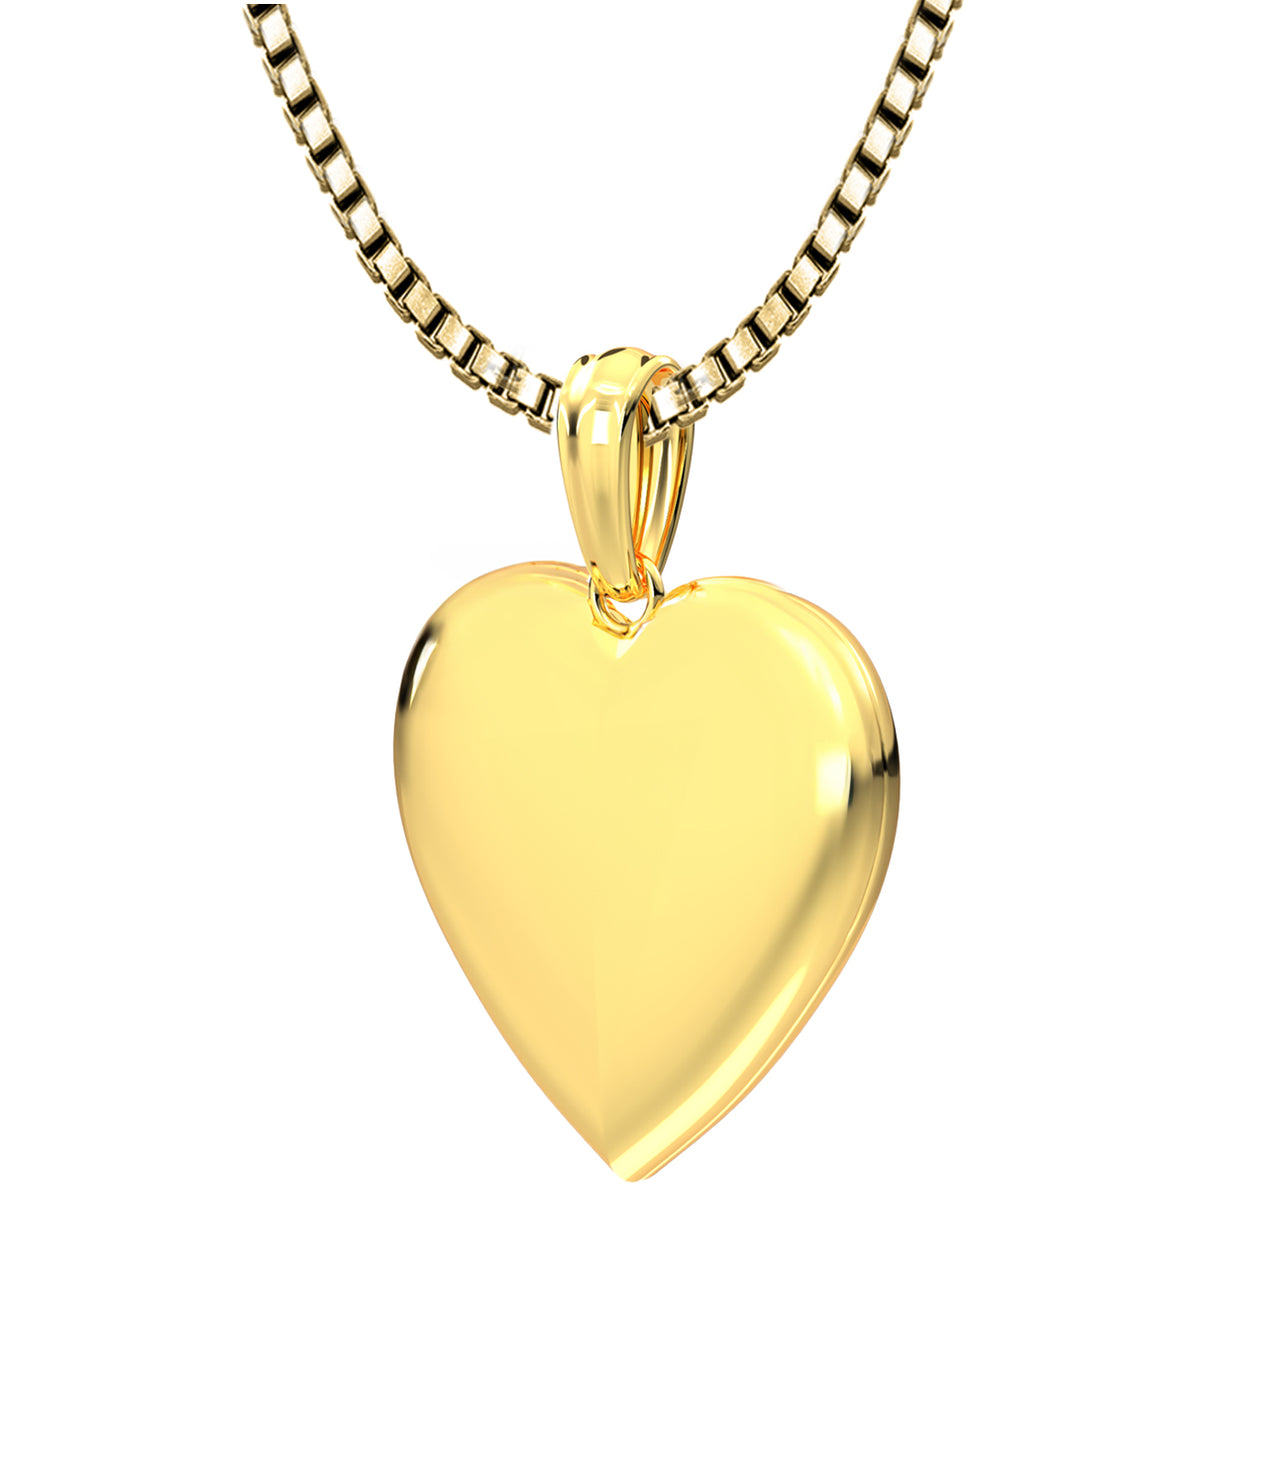 Engravable Personalized Ladies 14k Yellow Gold Polished Heart 2 Photo Locket Pendant Necklace, 16mm